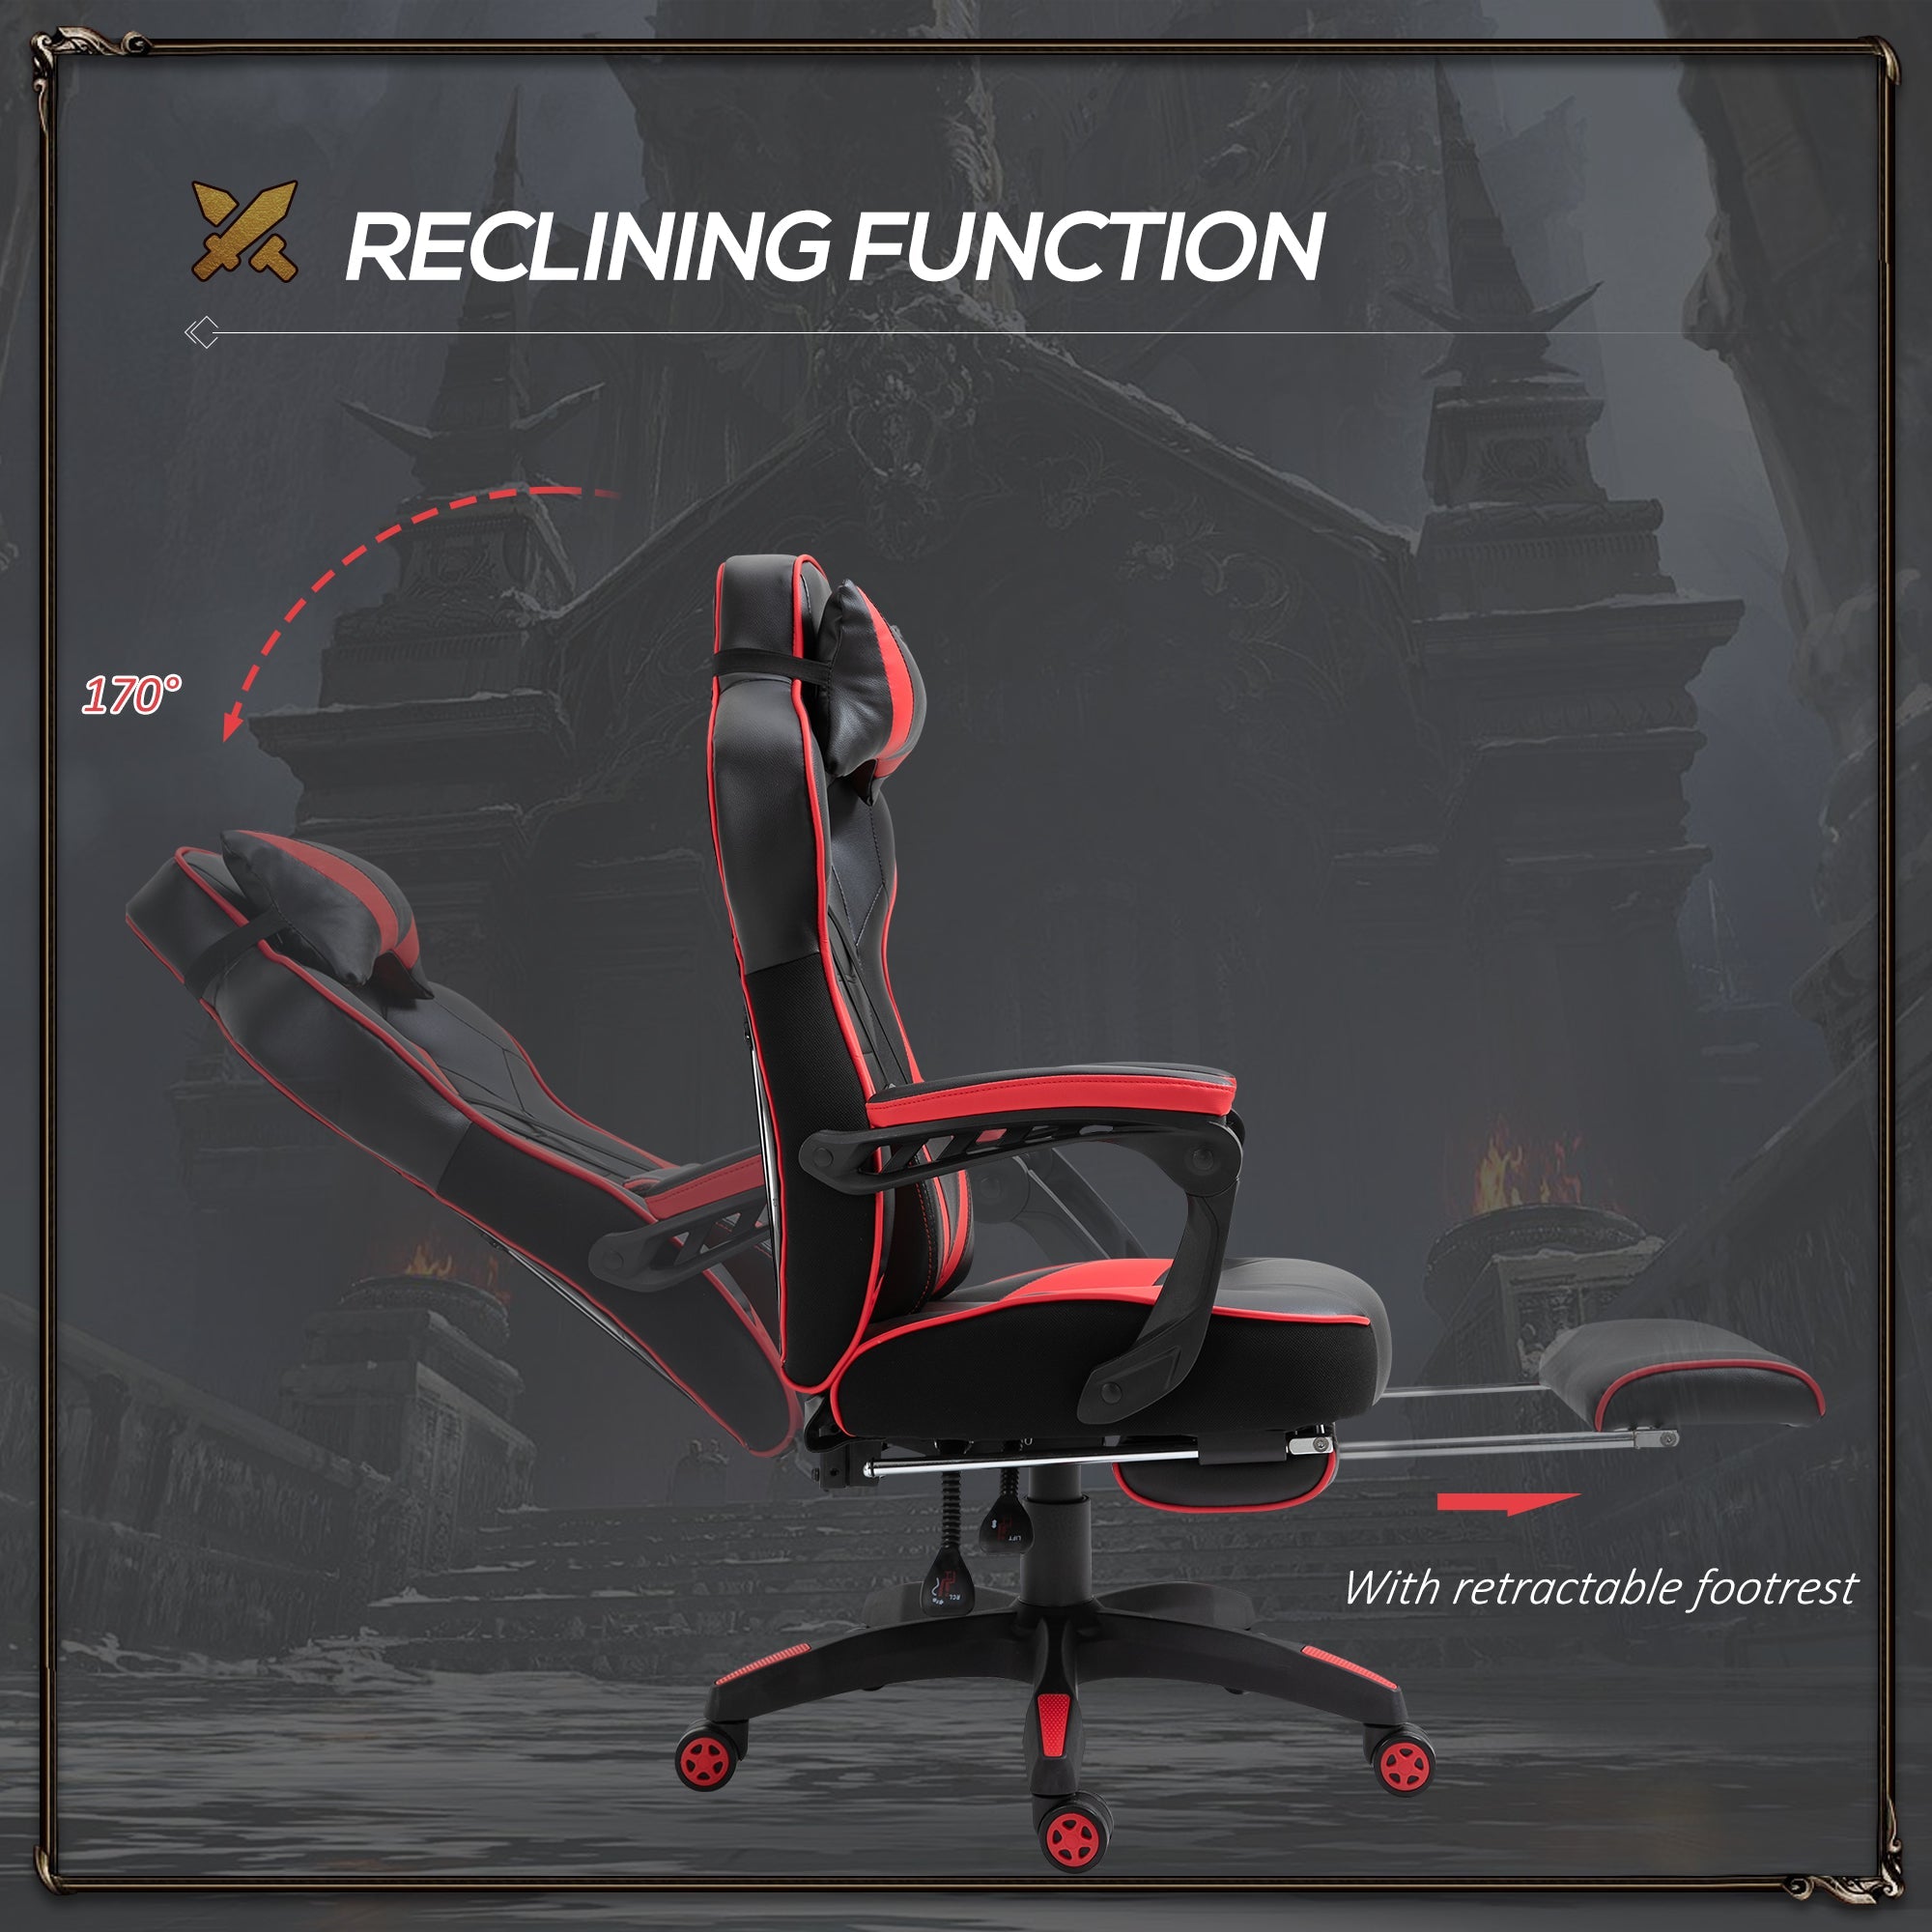 Ergonomic Racing Gaming Chair Office Desk Chair Adjustable Height Recliner with Wheels, Headrest, Lumbar Support, Retractable Footrest, Red-4